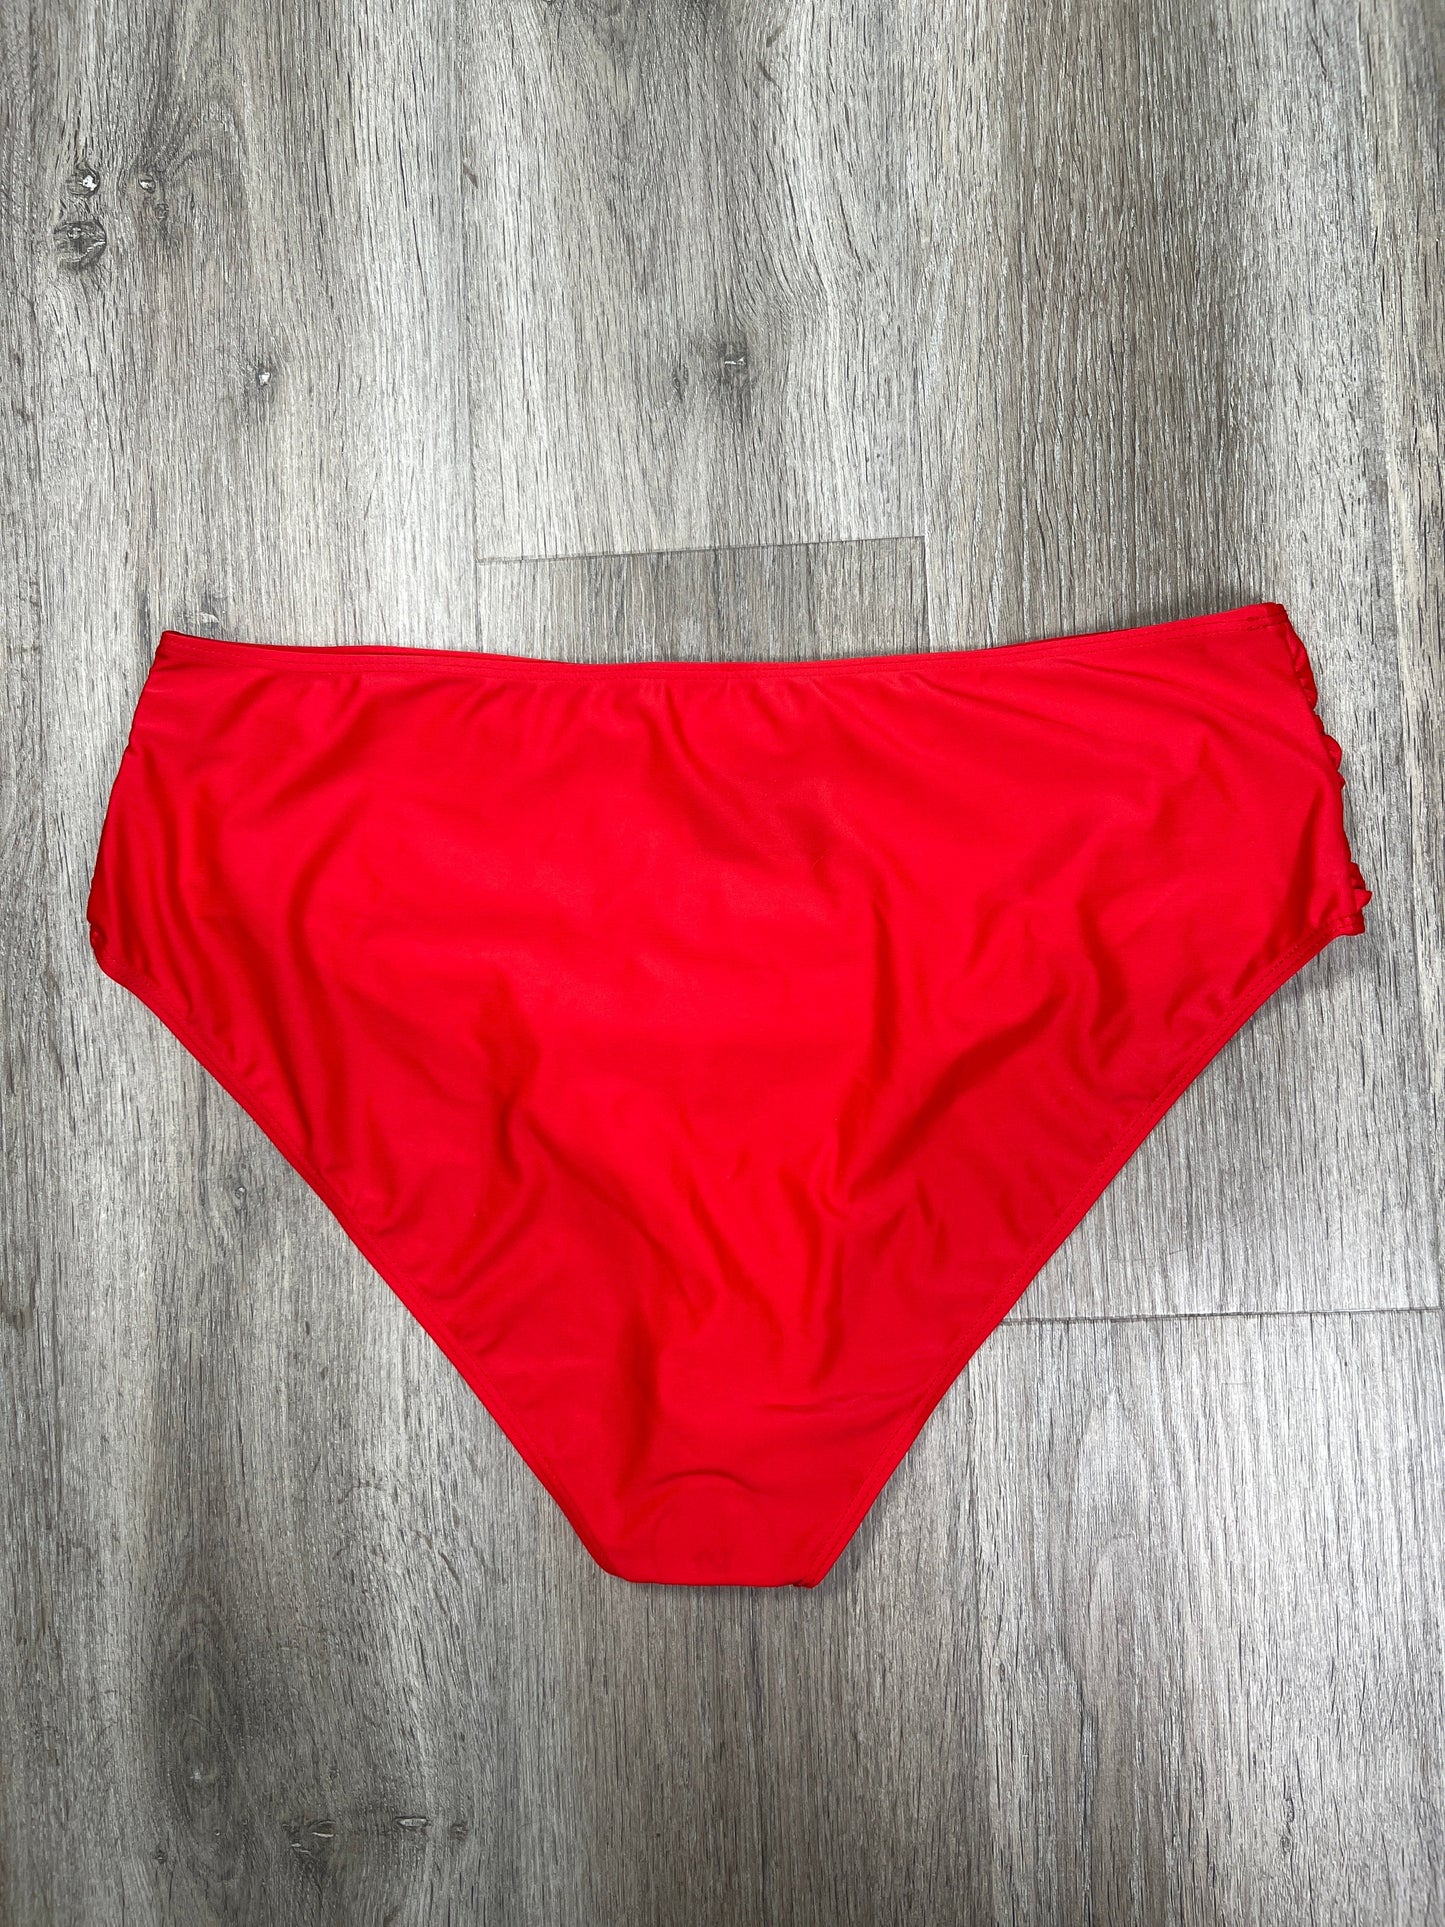 Red Swimsuit Bottom Shein, Size 3x